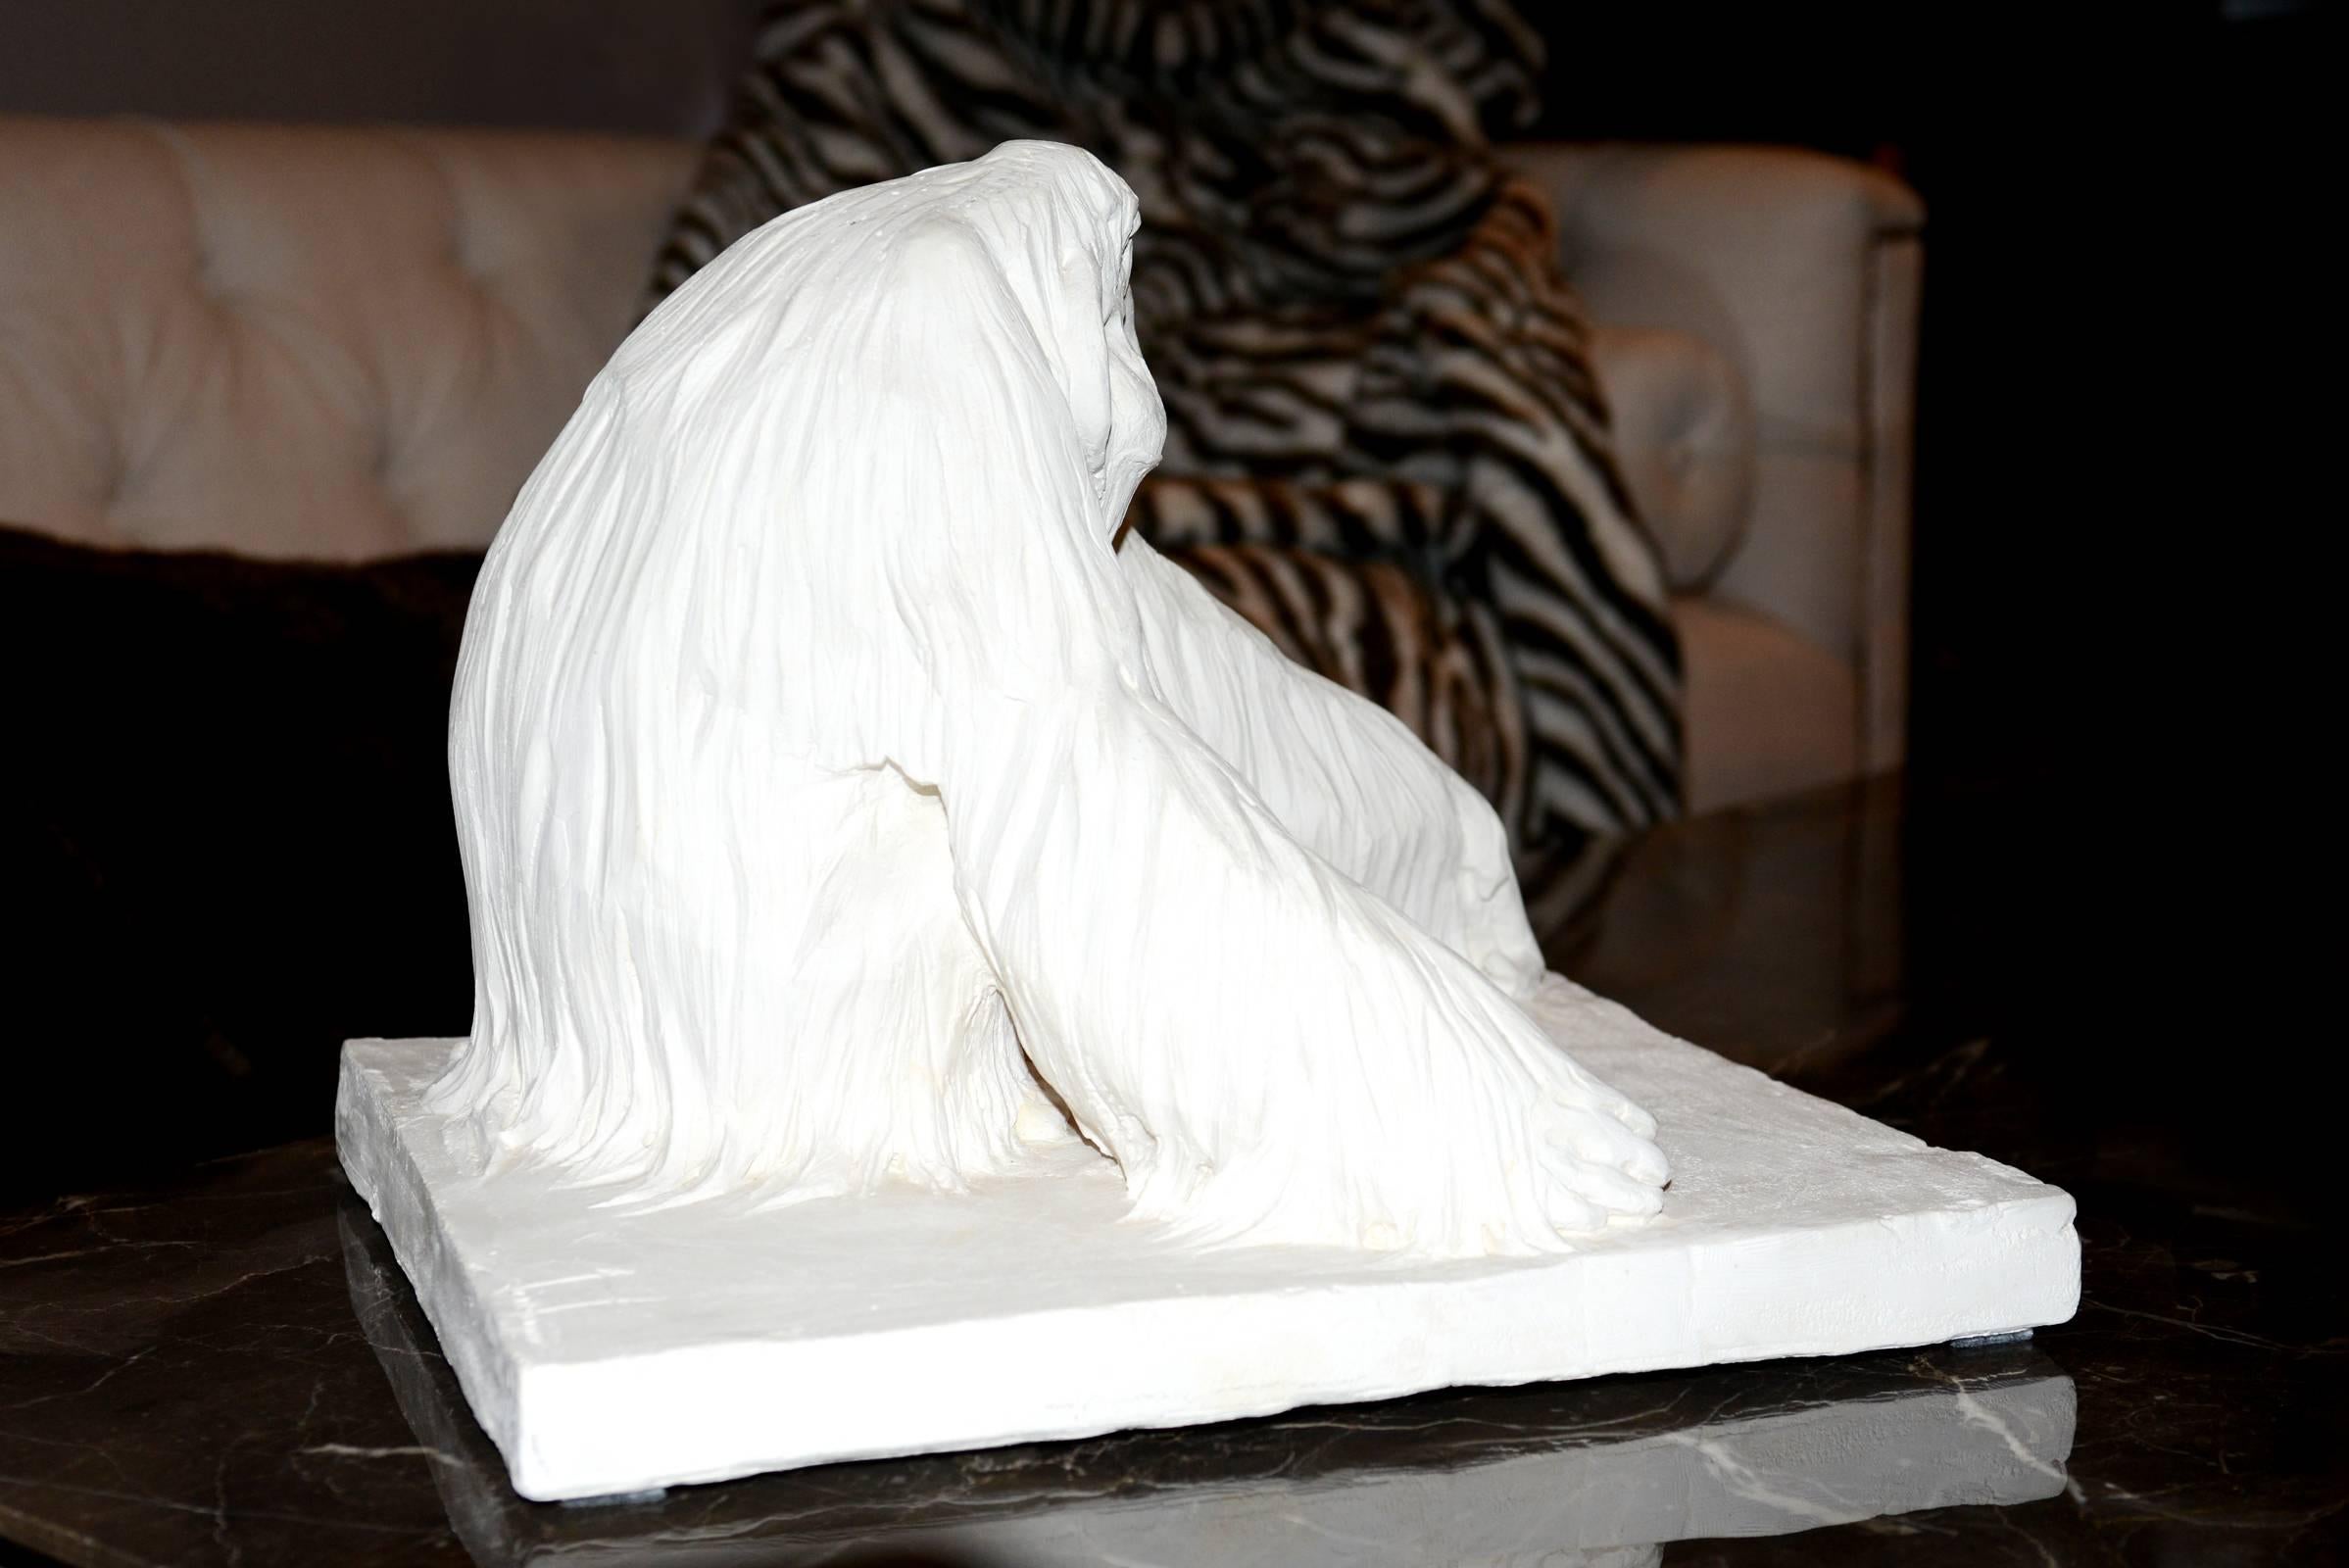 Contemporary Sculpture Orangoutan in Plaster Limited Edition 65/100 by J.B Vandamme, 2015 For Sale